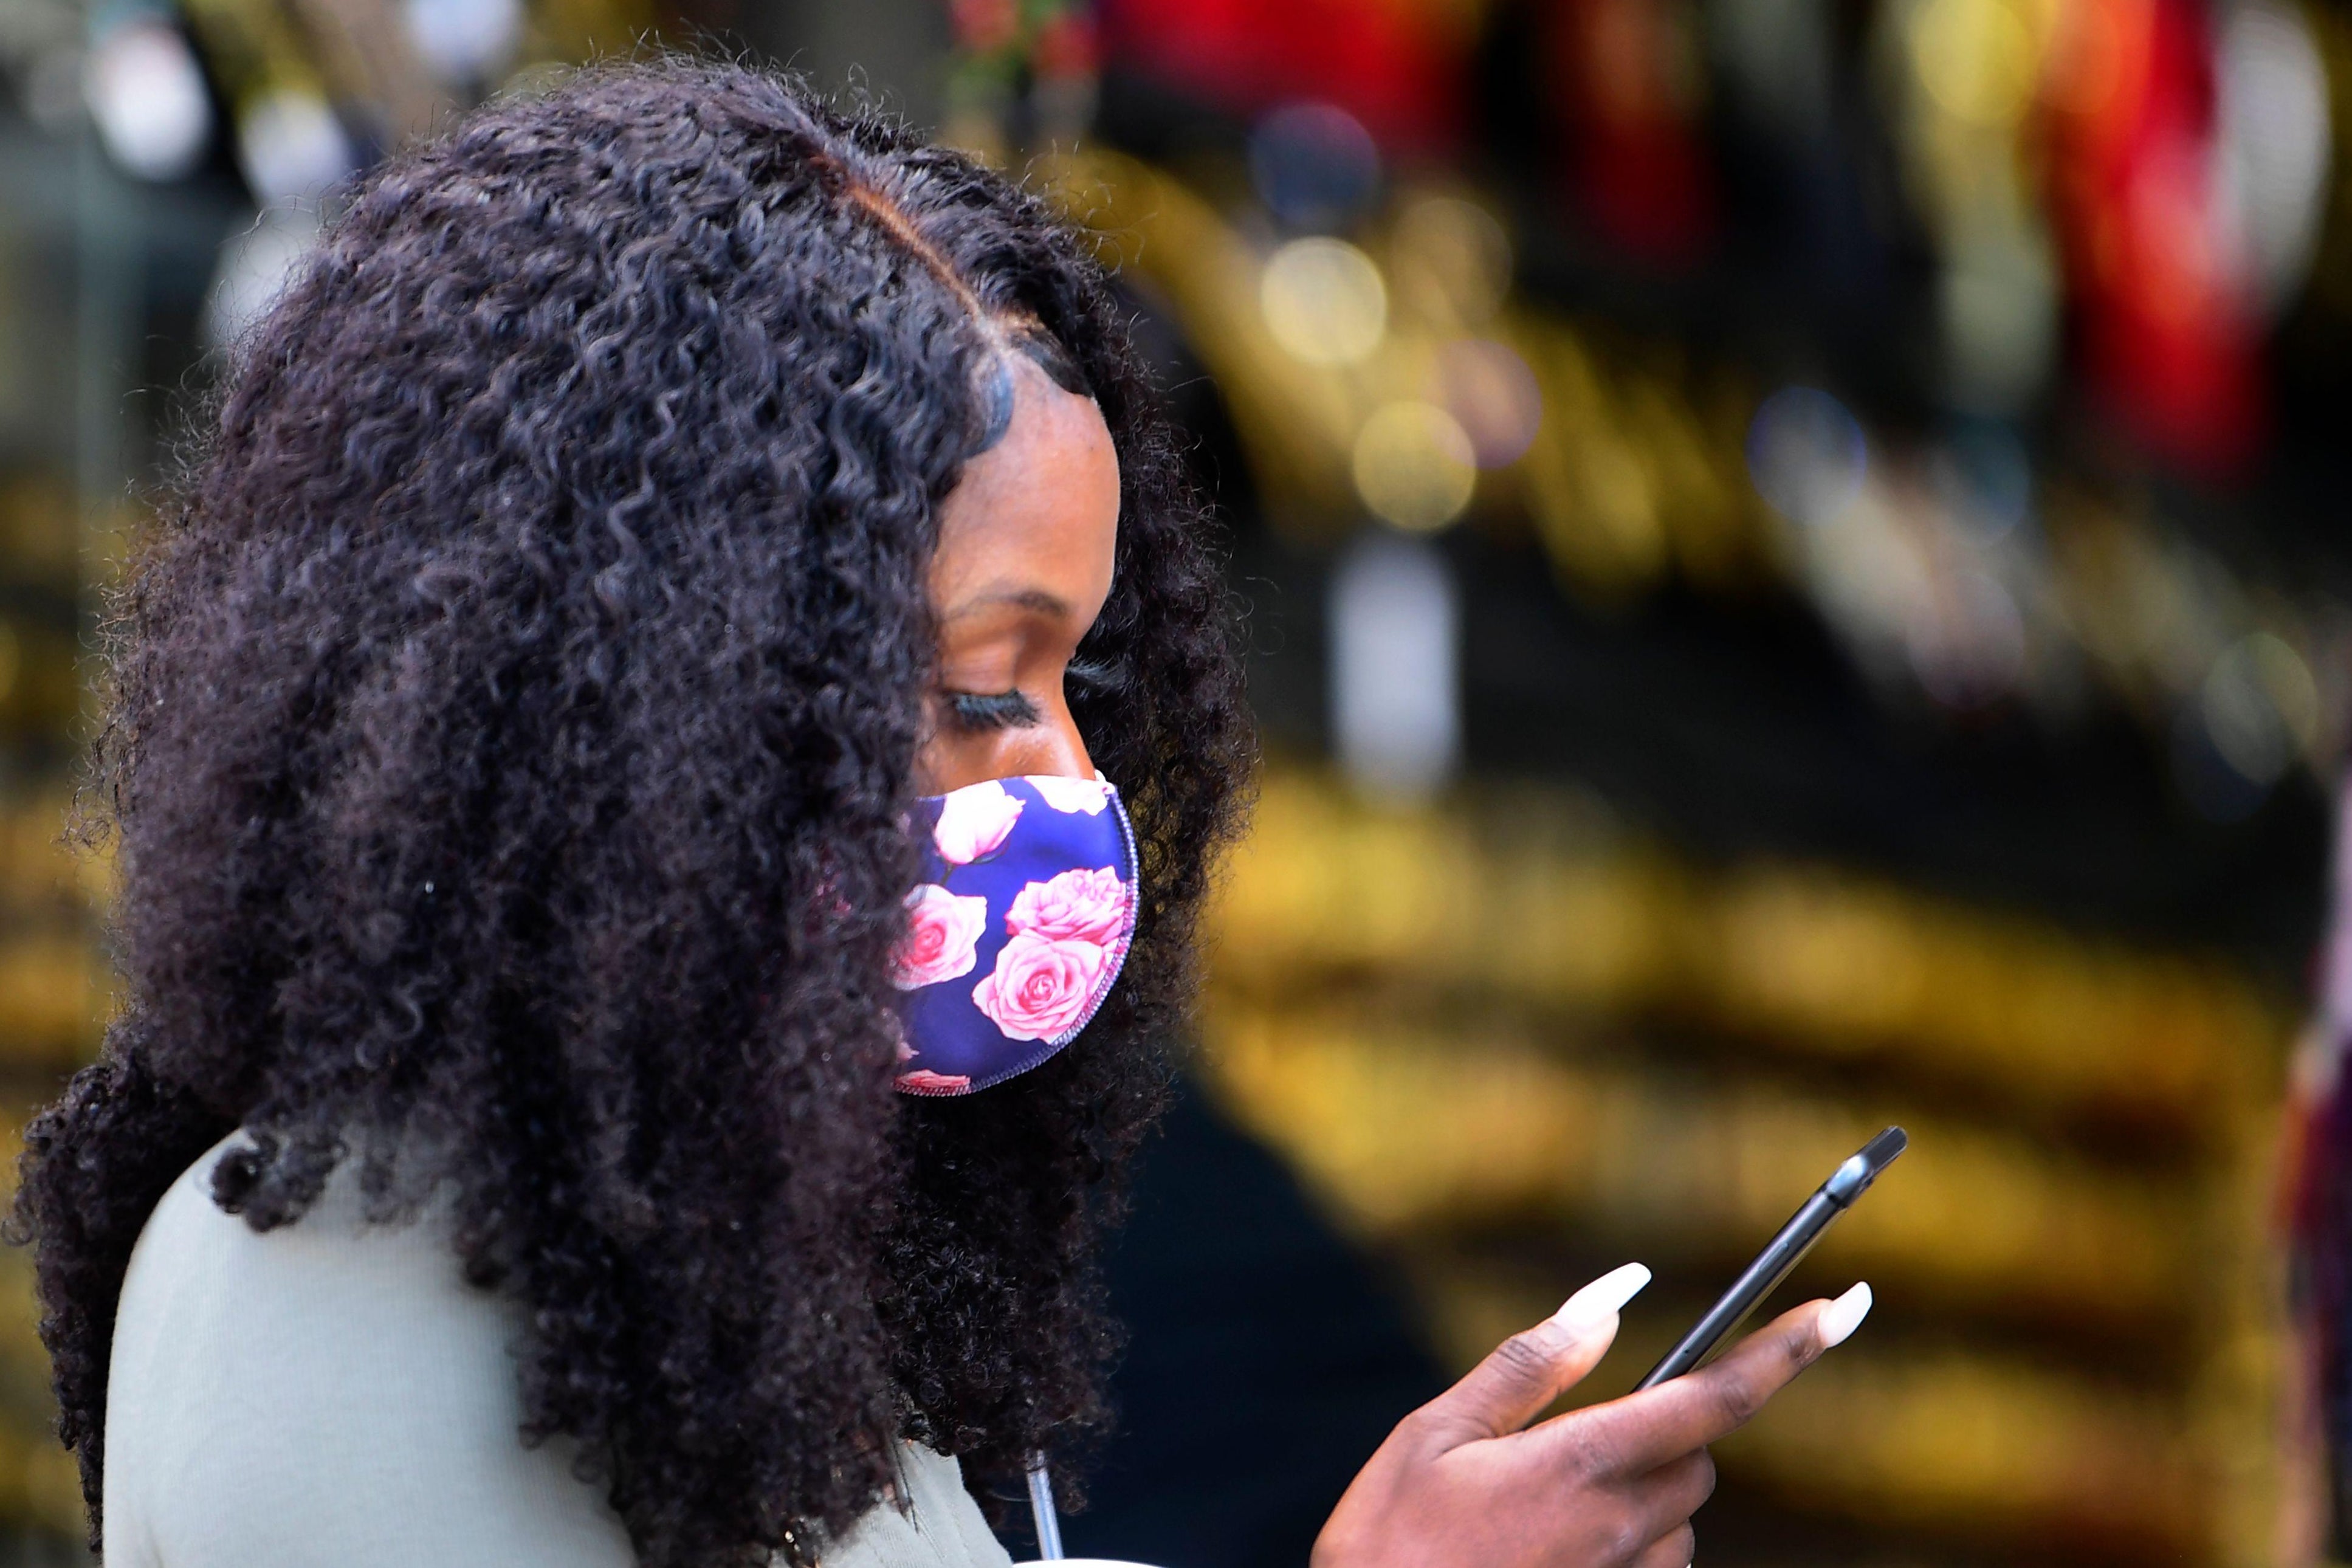 A woman wearing a cloth face mask with flowers checks her cellphone.